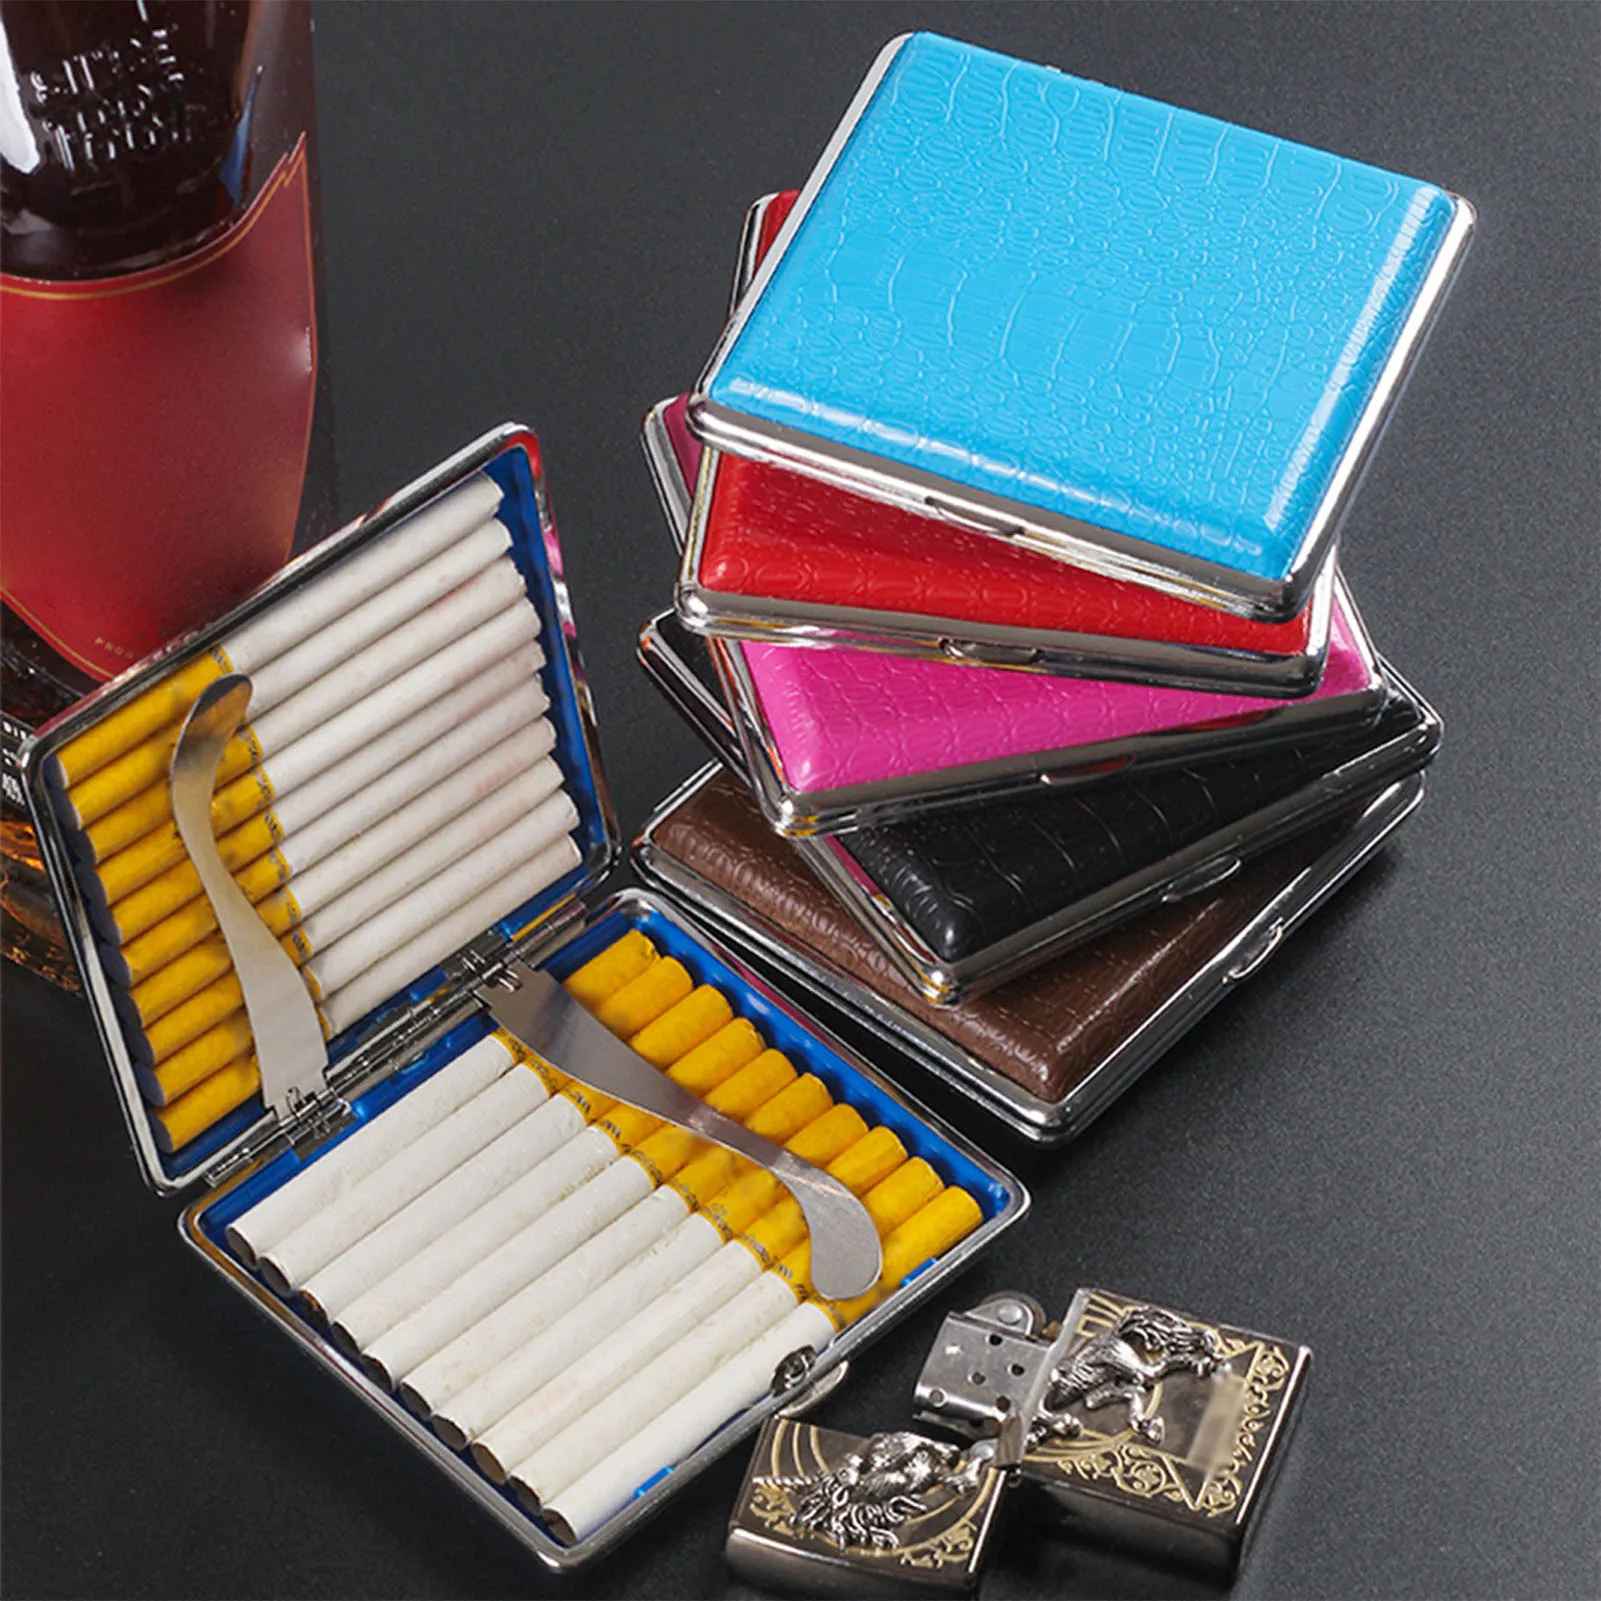 

20 Sticks Gift for Men's Leather Cigarette Box Cigar Case Metal Leather Smoking Accessories Cigarette Lady Storage Cover Hold